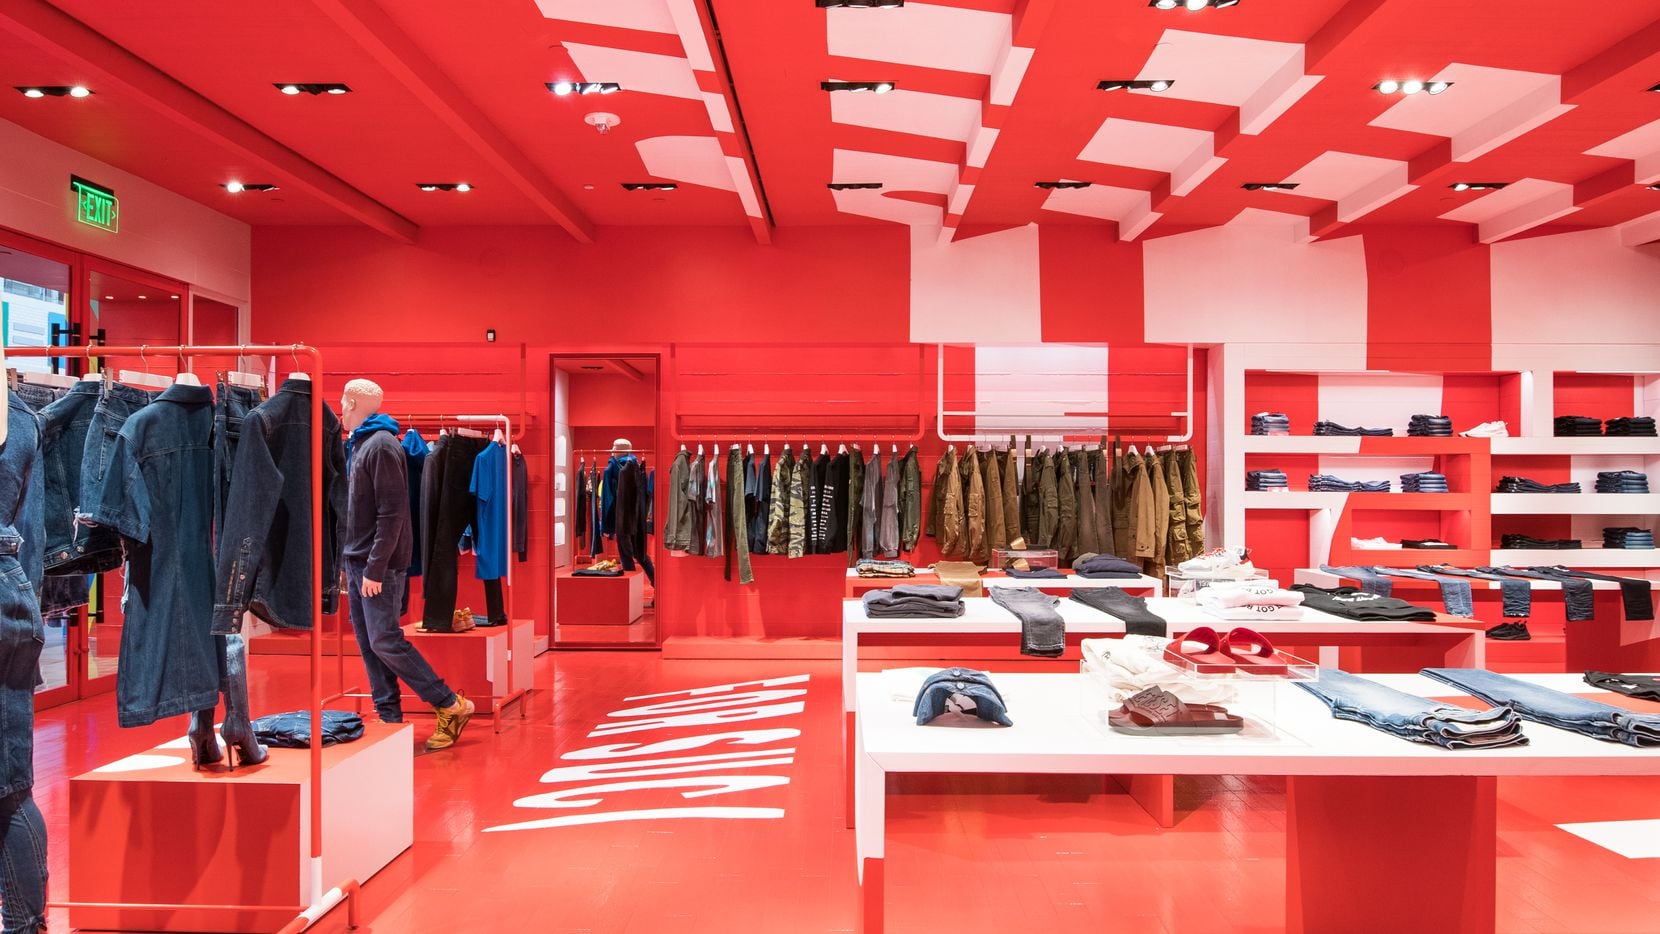 Red and white all over: Premium denim brand Diesel opened a new store at NorthPark Center in July.